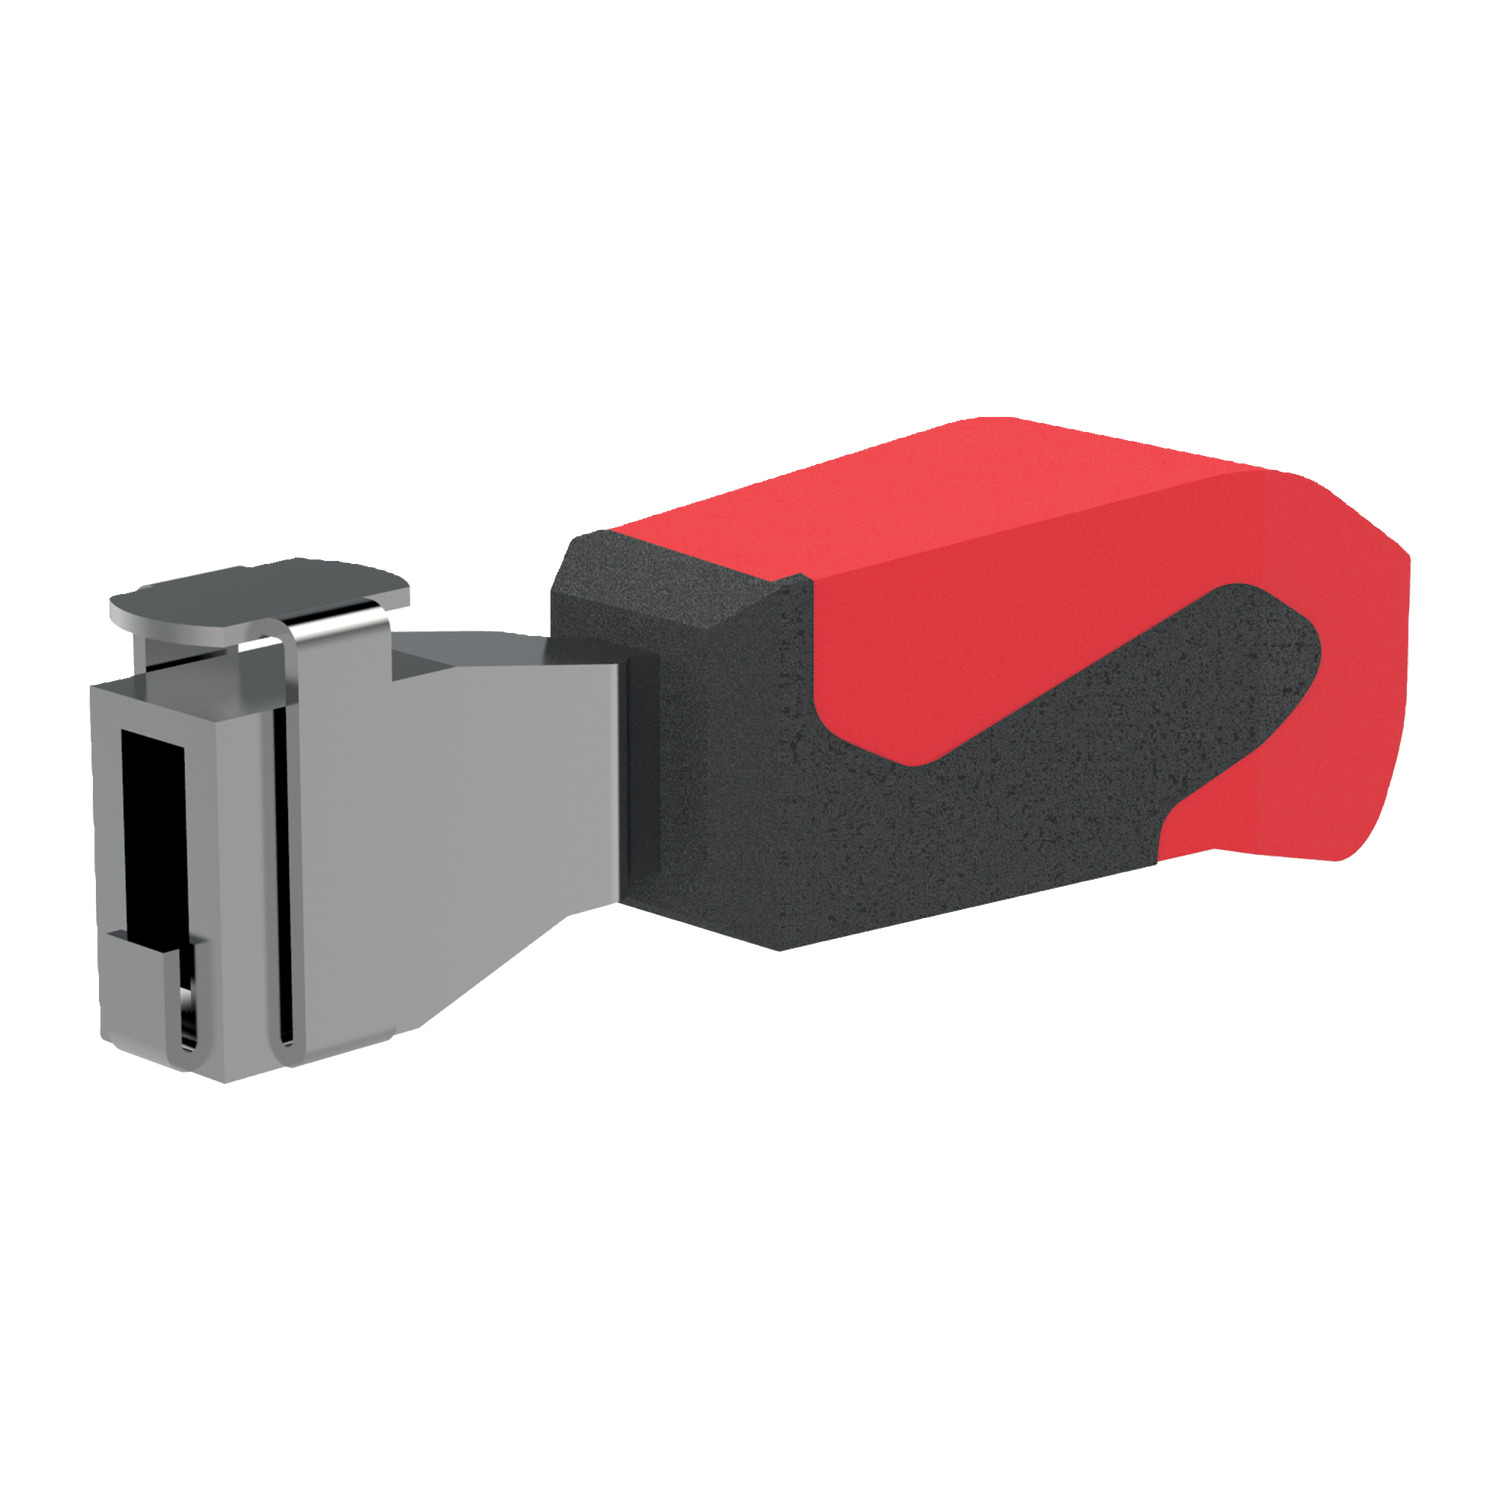 Product 41005.2, Red Handle - Removable for horizontal acting toggle clamp / 